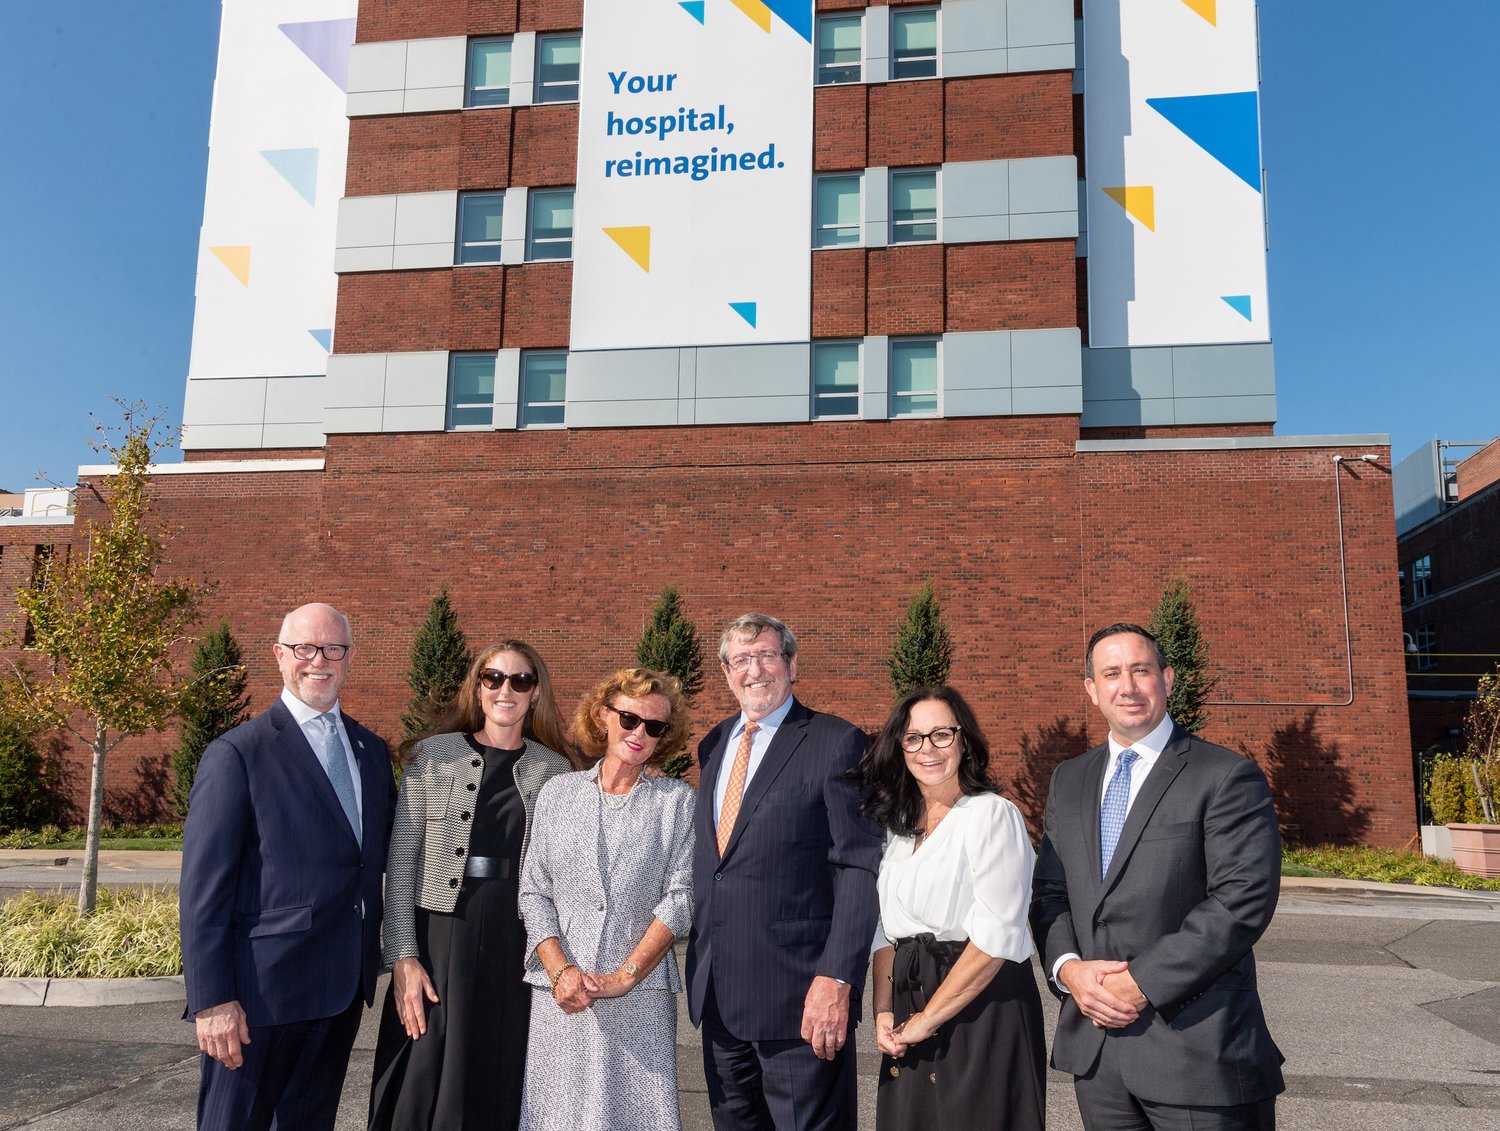 Entenmann family members and Northwell Health executives celebrate the family’s gift to South Shore University Hospital, the largest in the hospital’s history.  From left: Brian T. Lally, Northwell Health senior vice president and chief development officer; philanthropists Kelly Ernie and Jaime (Entenmann) Padden; Michael J. Dowling, Northwell Health president and CEO; Donna Moravick, South Shore University Hospital executive director; and Steve Bello, Northwell’s eastern region executive director. Credit Northwell Health